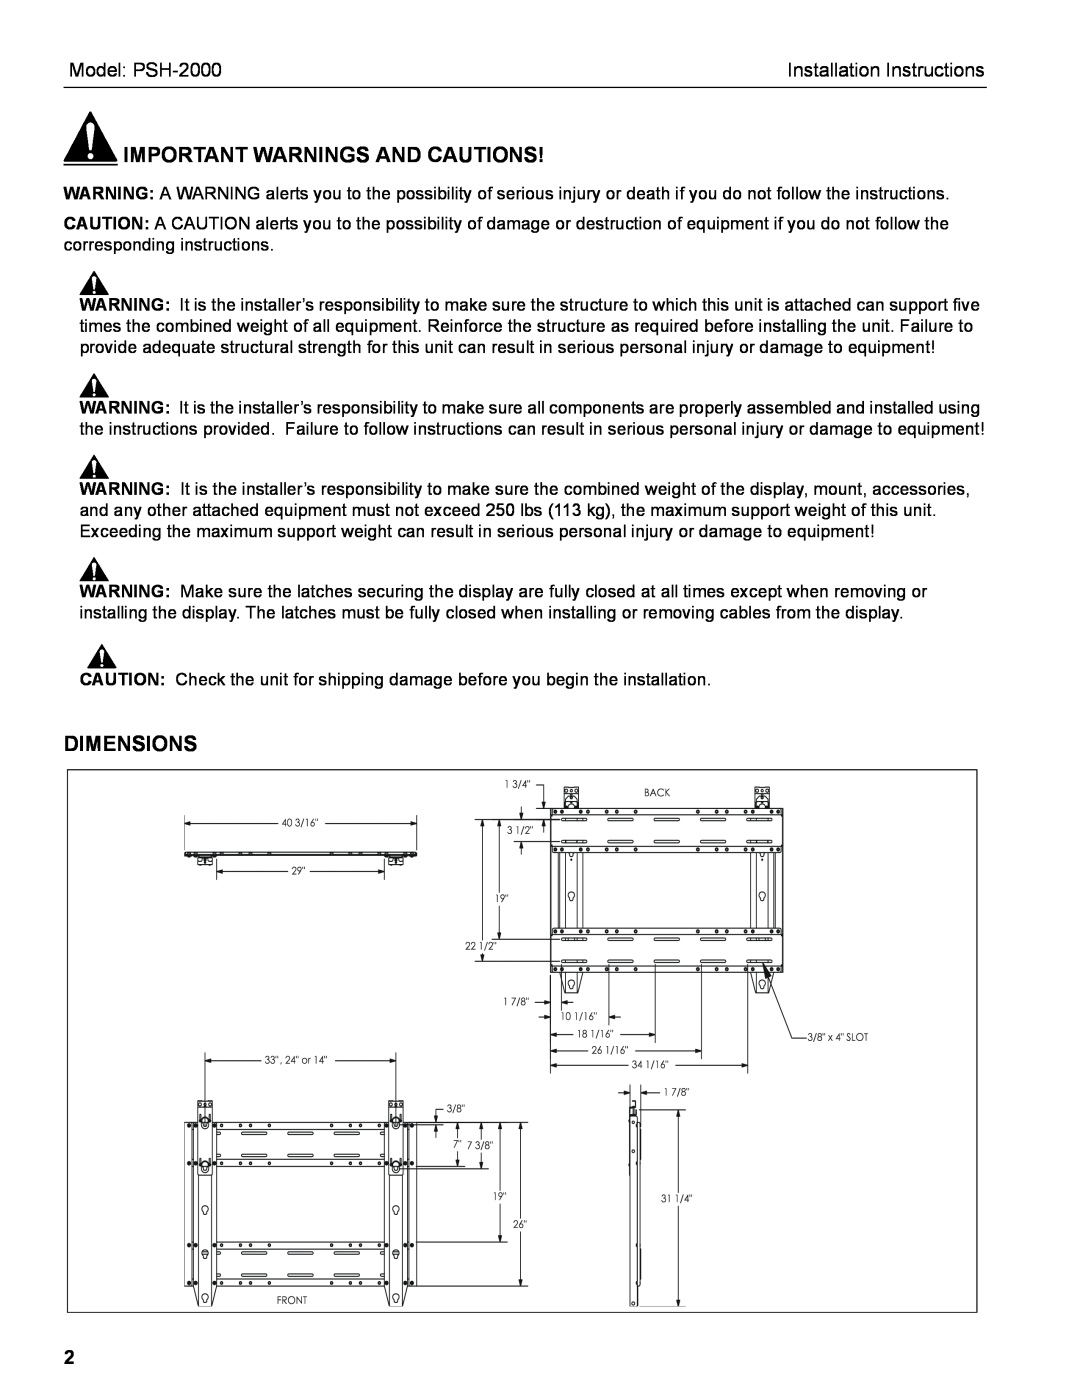 Chief Manufacturing Important Warnings And Cautions, Model PSH-2000, Installation Instructions, Dimensions 